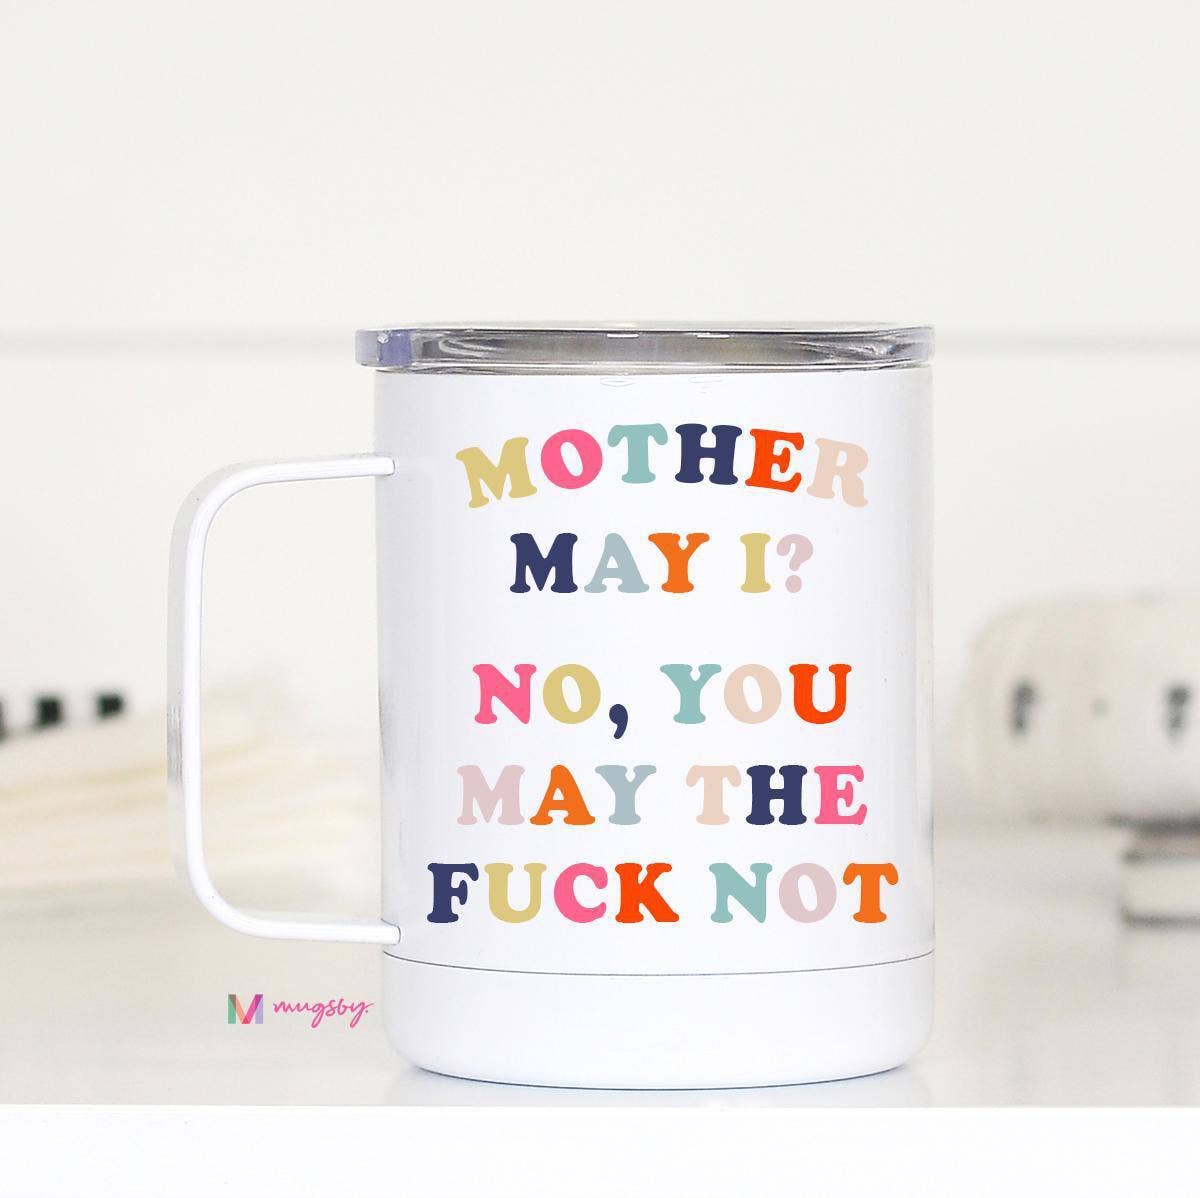 Mother May I? No, You May The F**k Not - Travel Cup With Handle